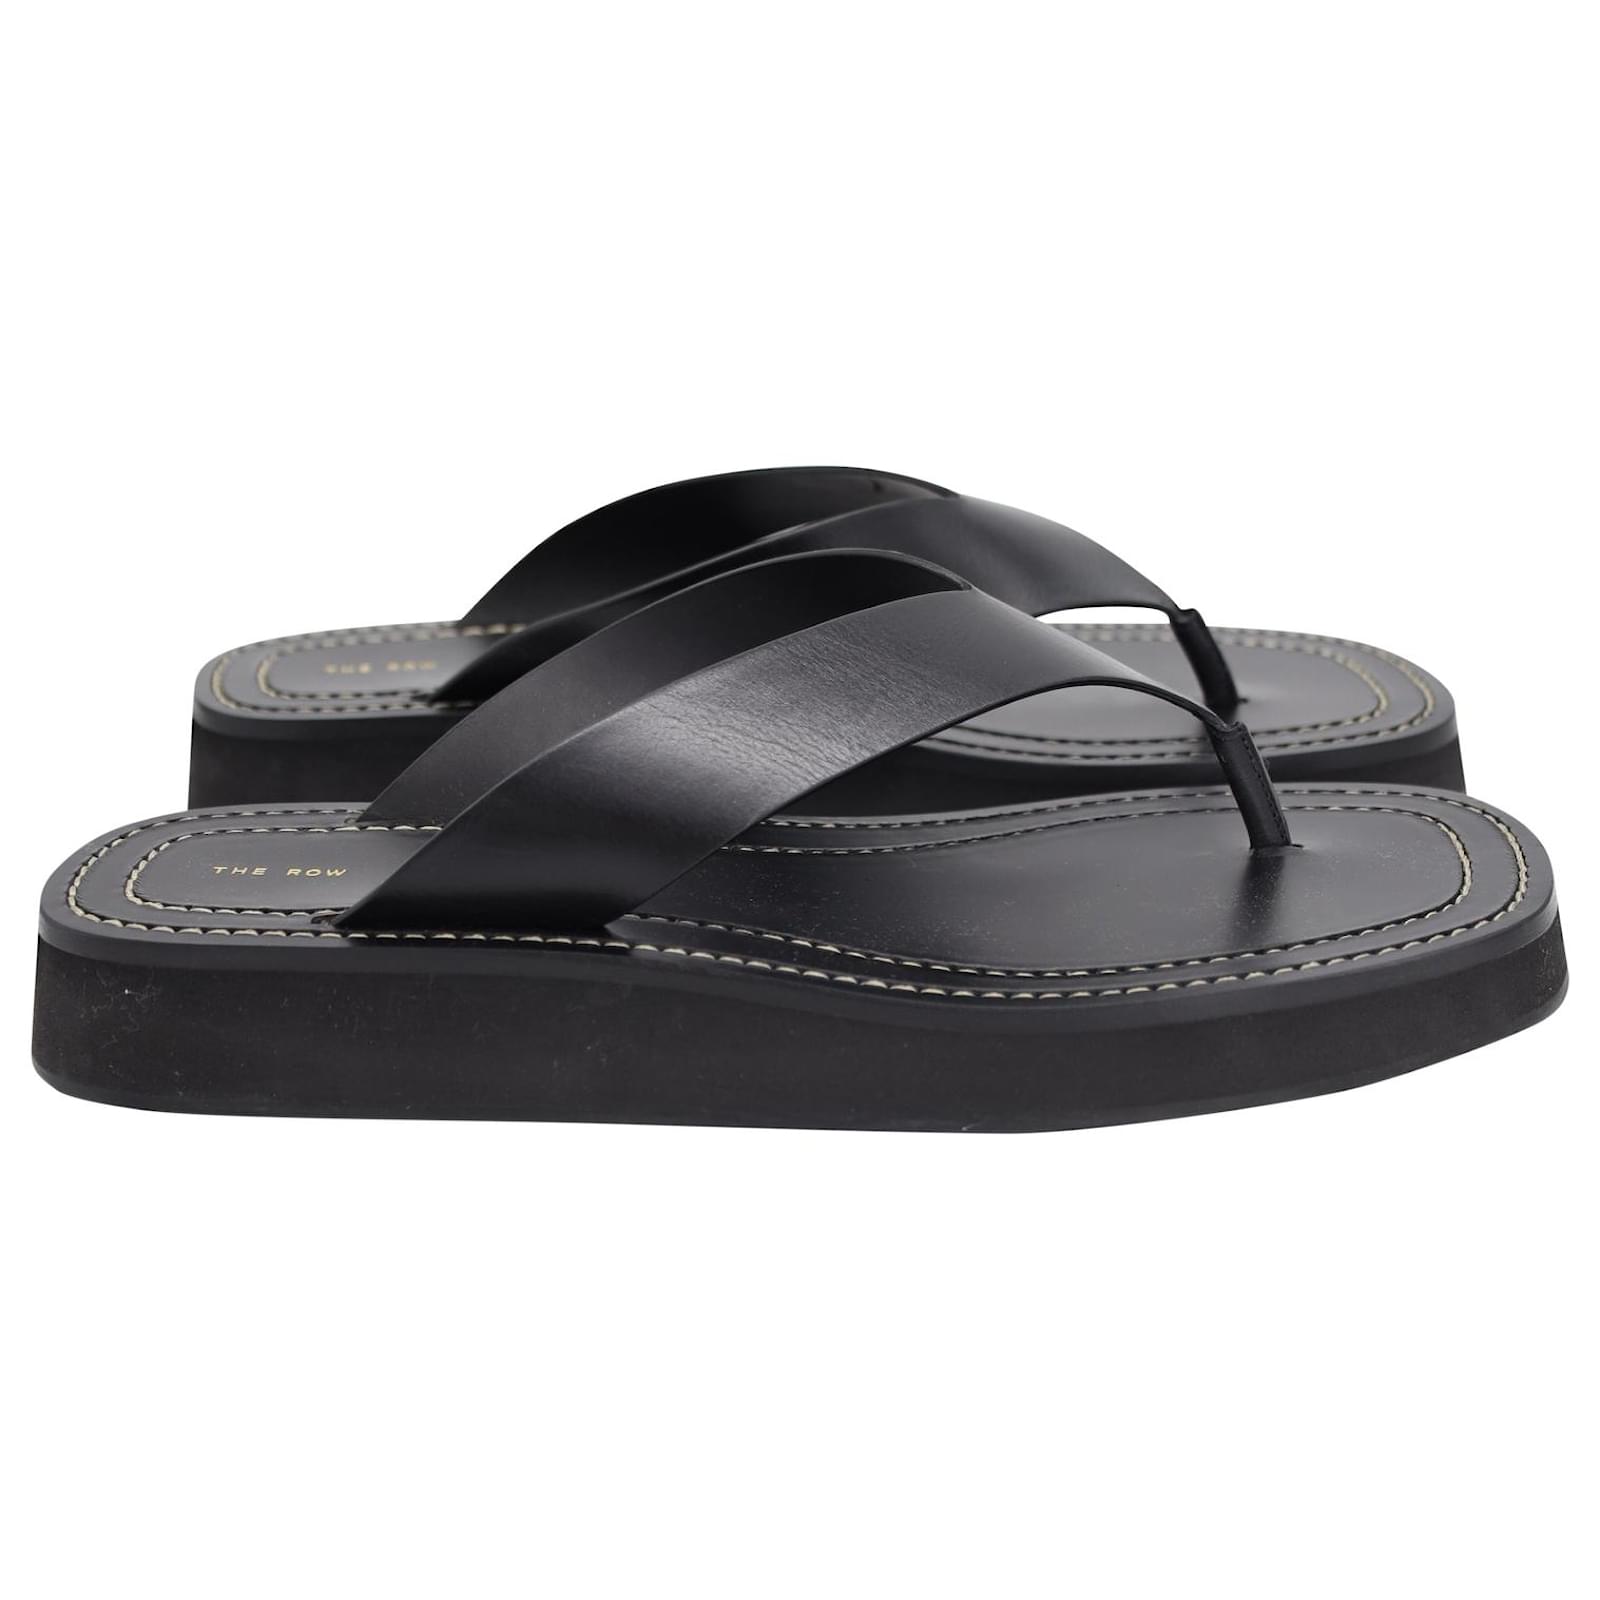 The Row Ginza Flip Flop Platform Sandals in Black calf leather